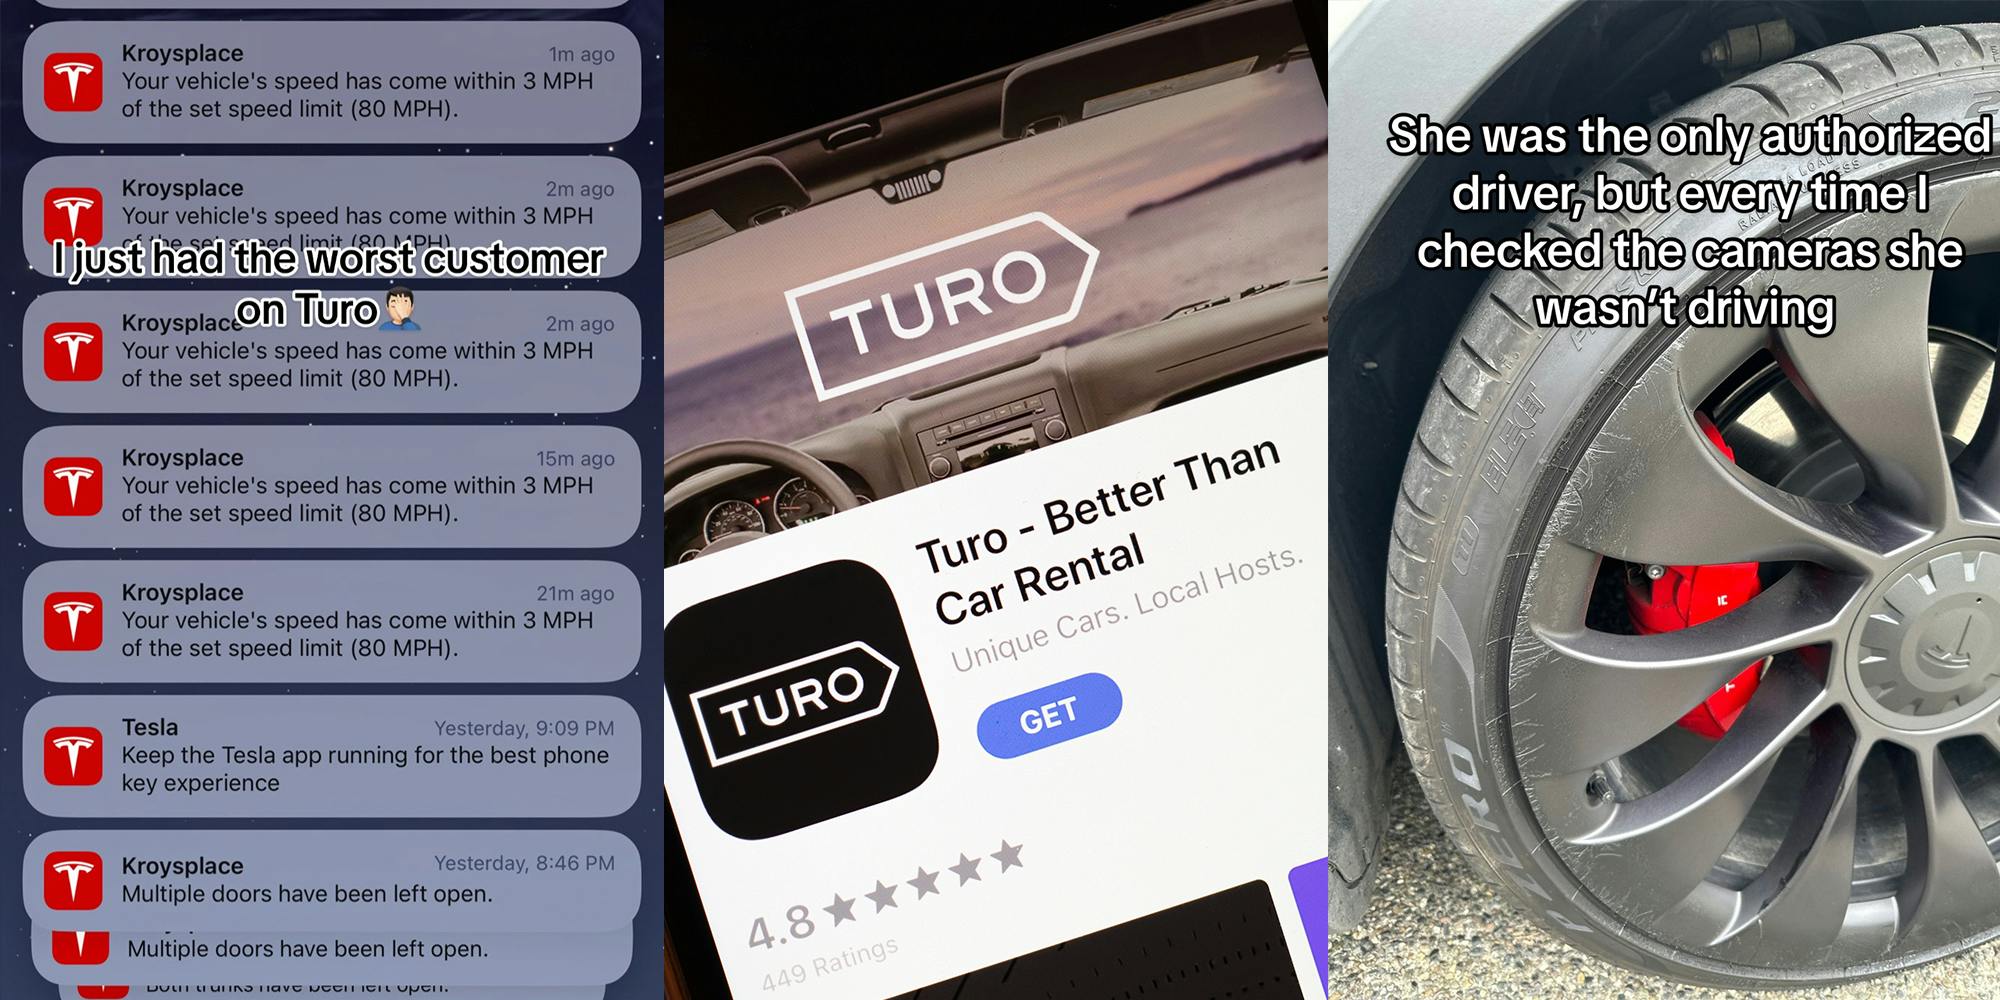 ‘Don’t put a vehicle on Turo if you actually care about it’: Turo user says Tesla came back damaged after renting it out